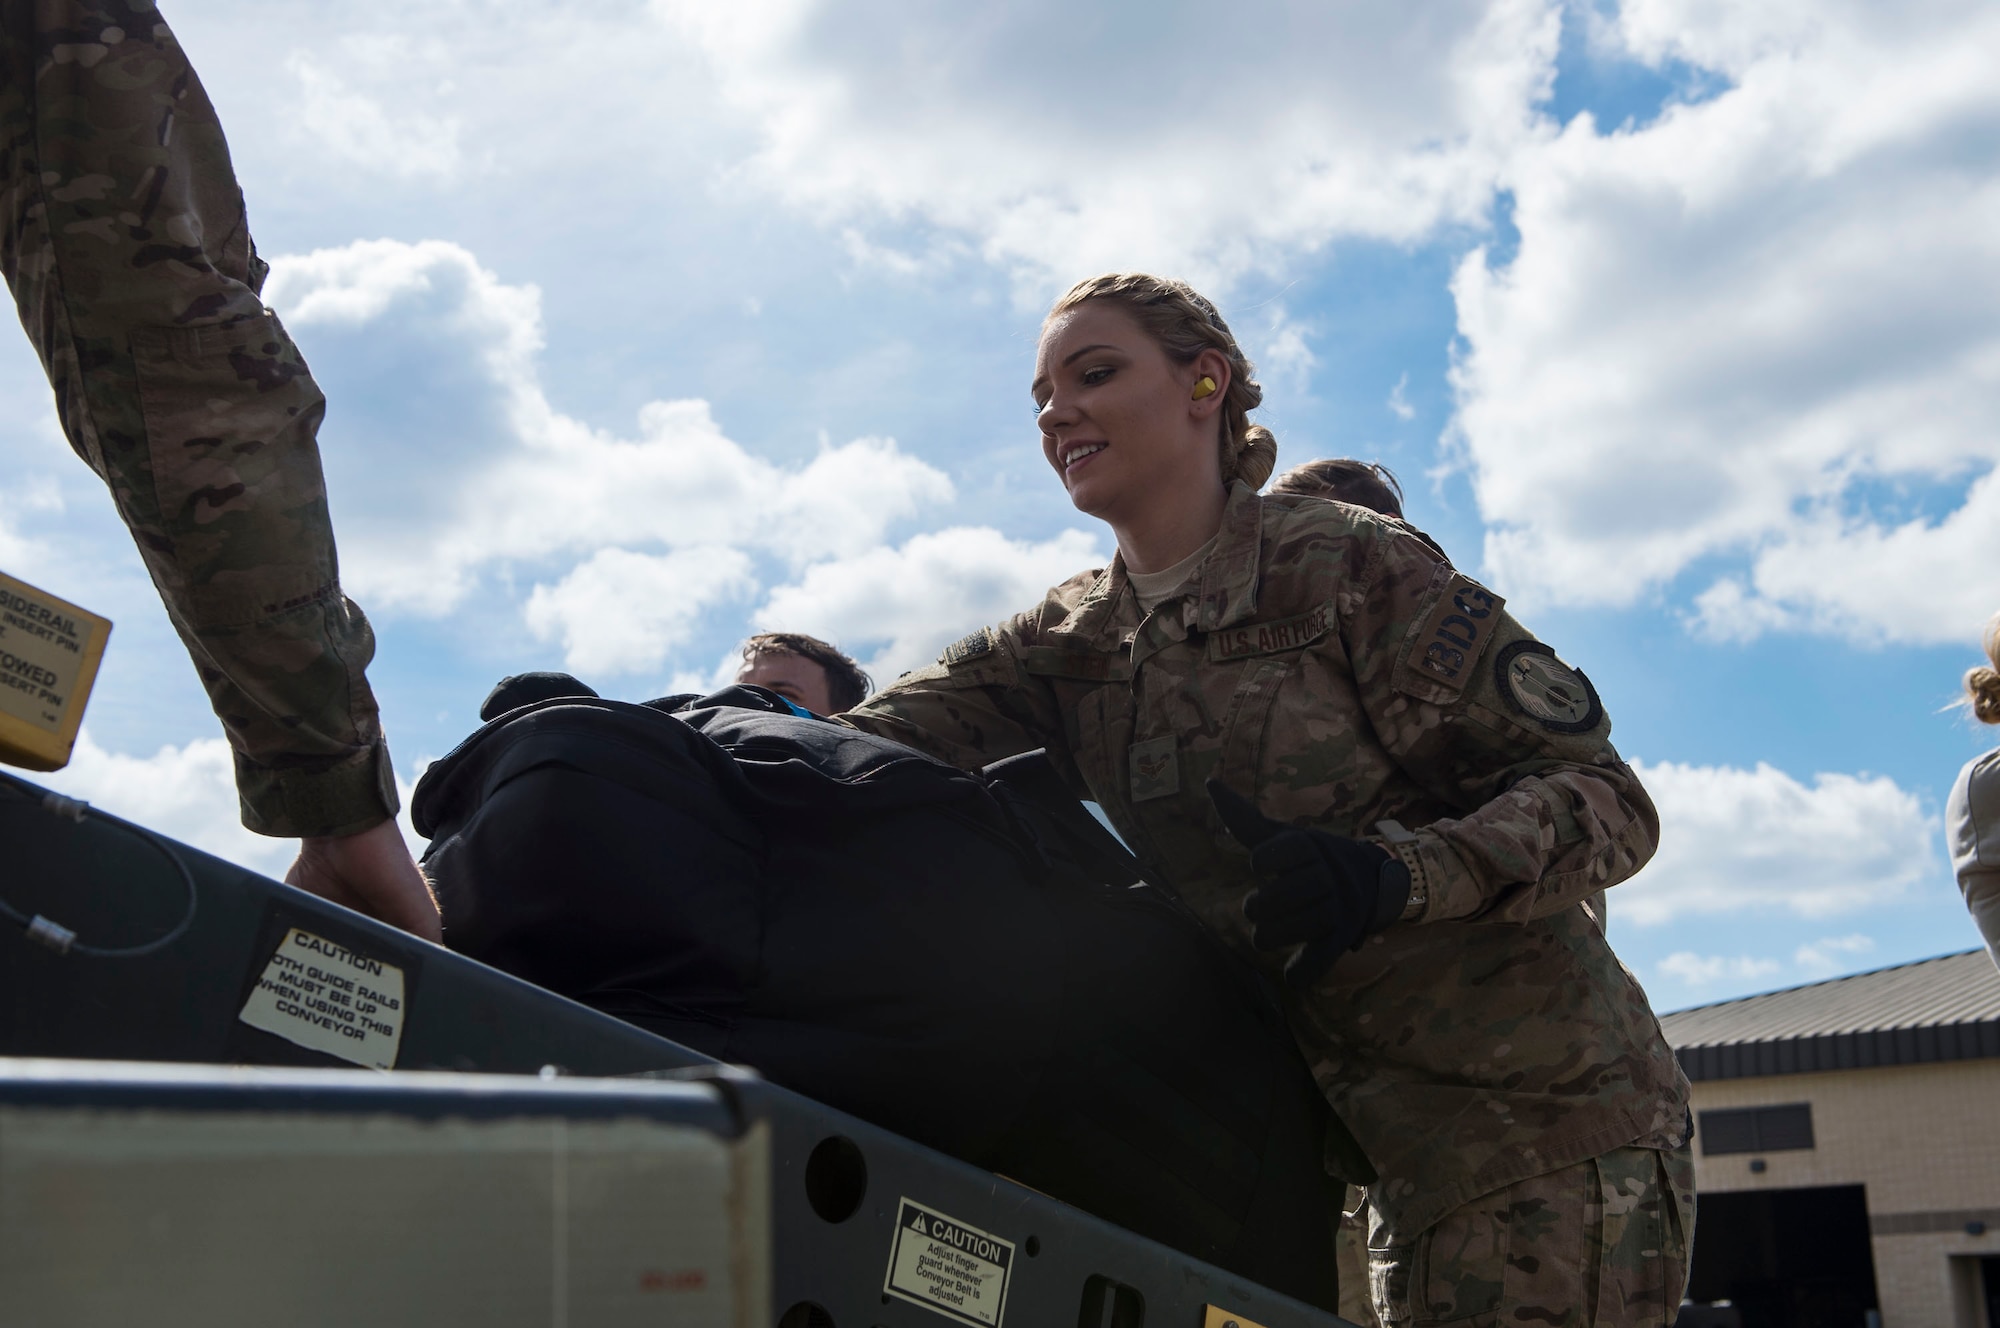 Airman 1st Class Brandy Stein, 823d Base Defense Squadron (BDS) fireteam member, places a bag onto a conveyor belt, 0ct. 24, 2018, at Moody Air Force Base, Ga. The 822d, 823d and 824th BDS’s provide high-risk force protection and integrated base defense for expeditionary air forces. Airmen from the 823d BDS just returned home from conducting relief-in-place in the United States Africa Command theater while Airmen from the 824th BDS took their place. (U.S. Air Force photo by Senior Airman Janiqua P. Robinson)